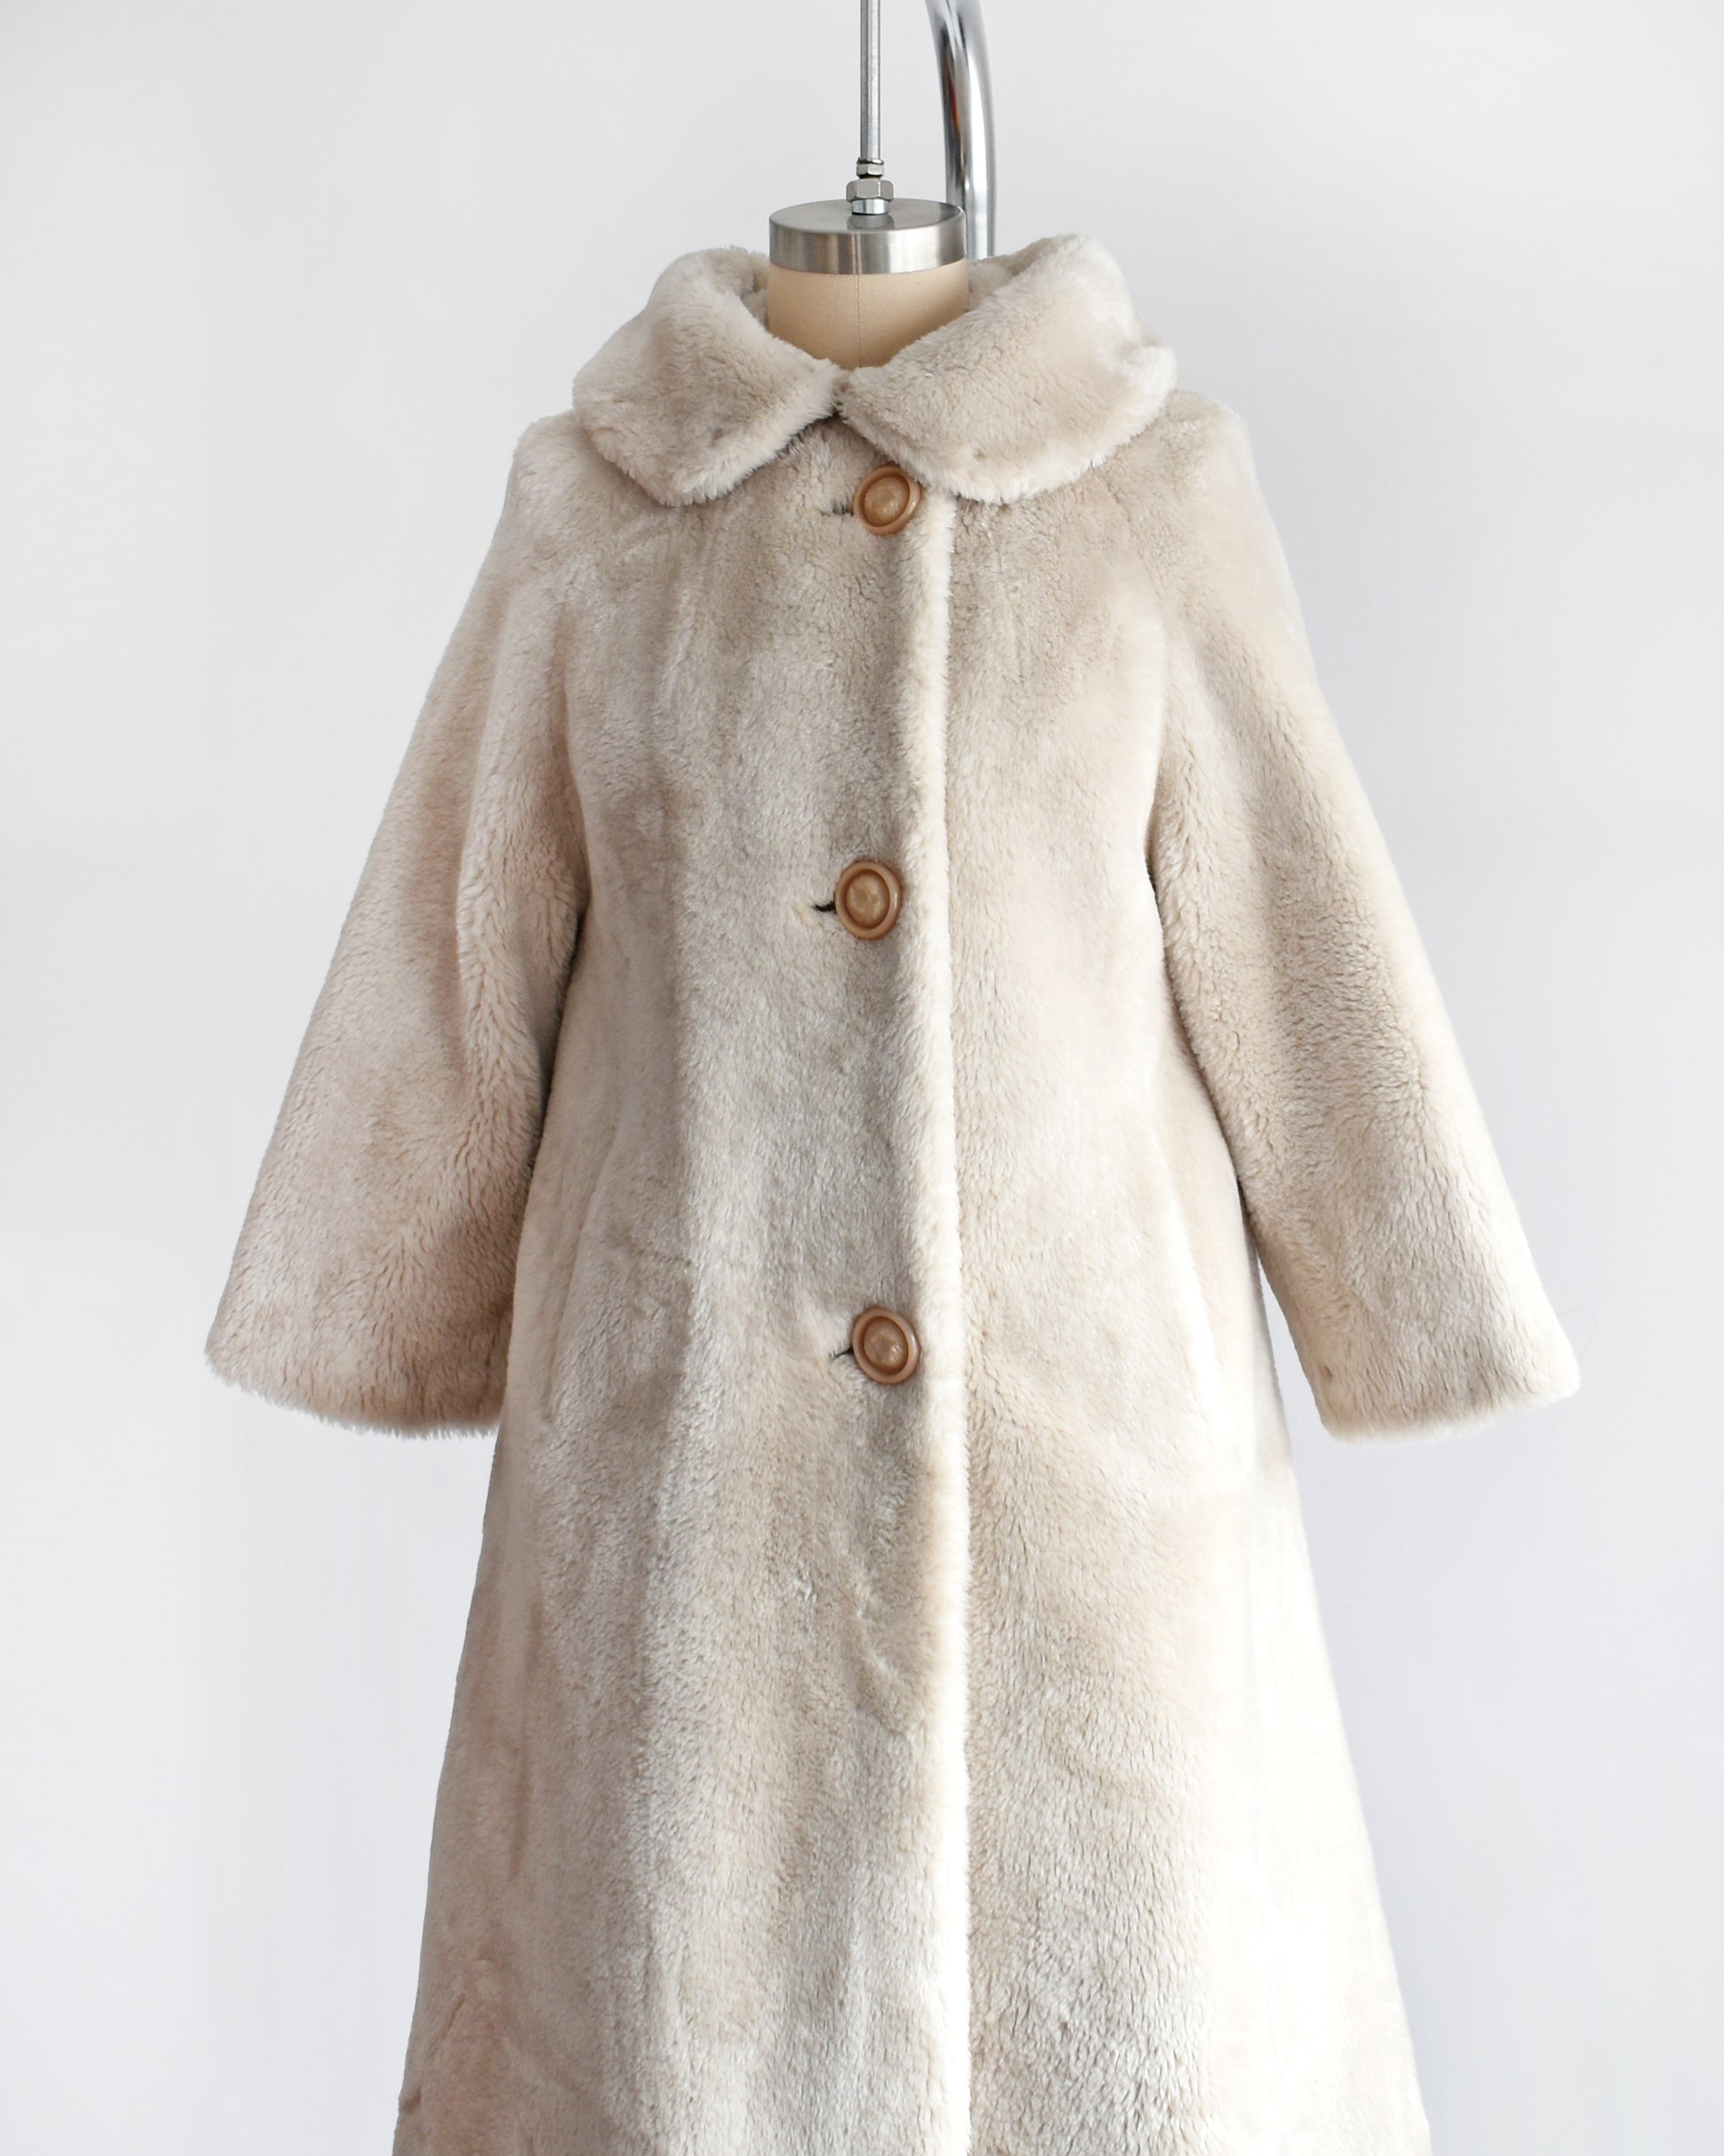 Side front view of a vintage 1960s plush cream faux fur coat that features a Peter Pan style collar and three large buttons down the front